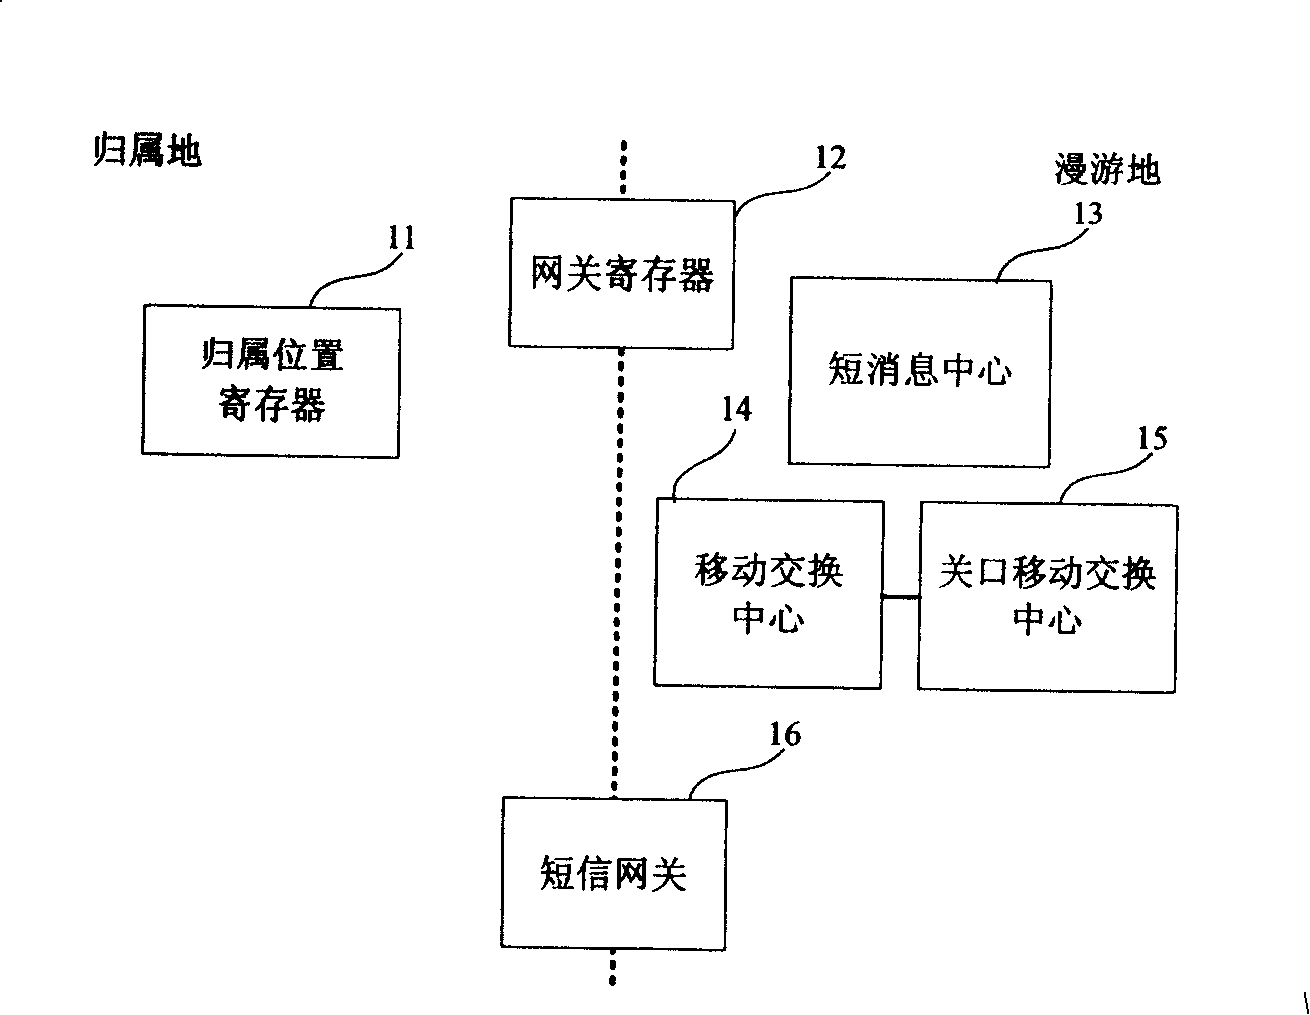 Device and method for implementing SIMN short message service